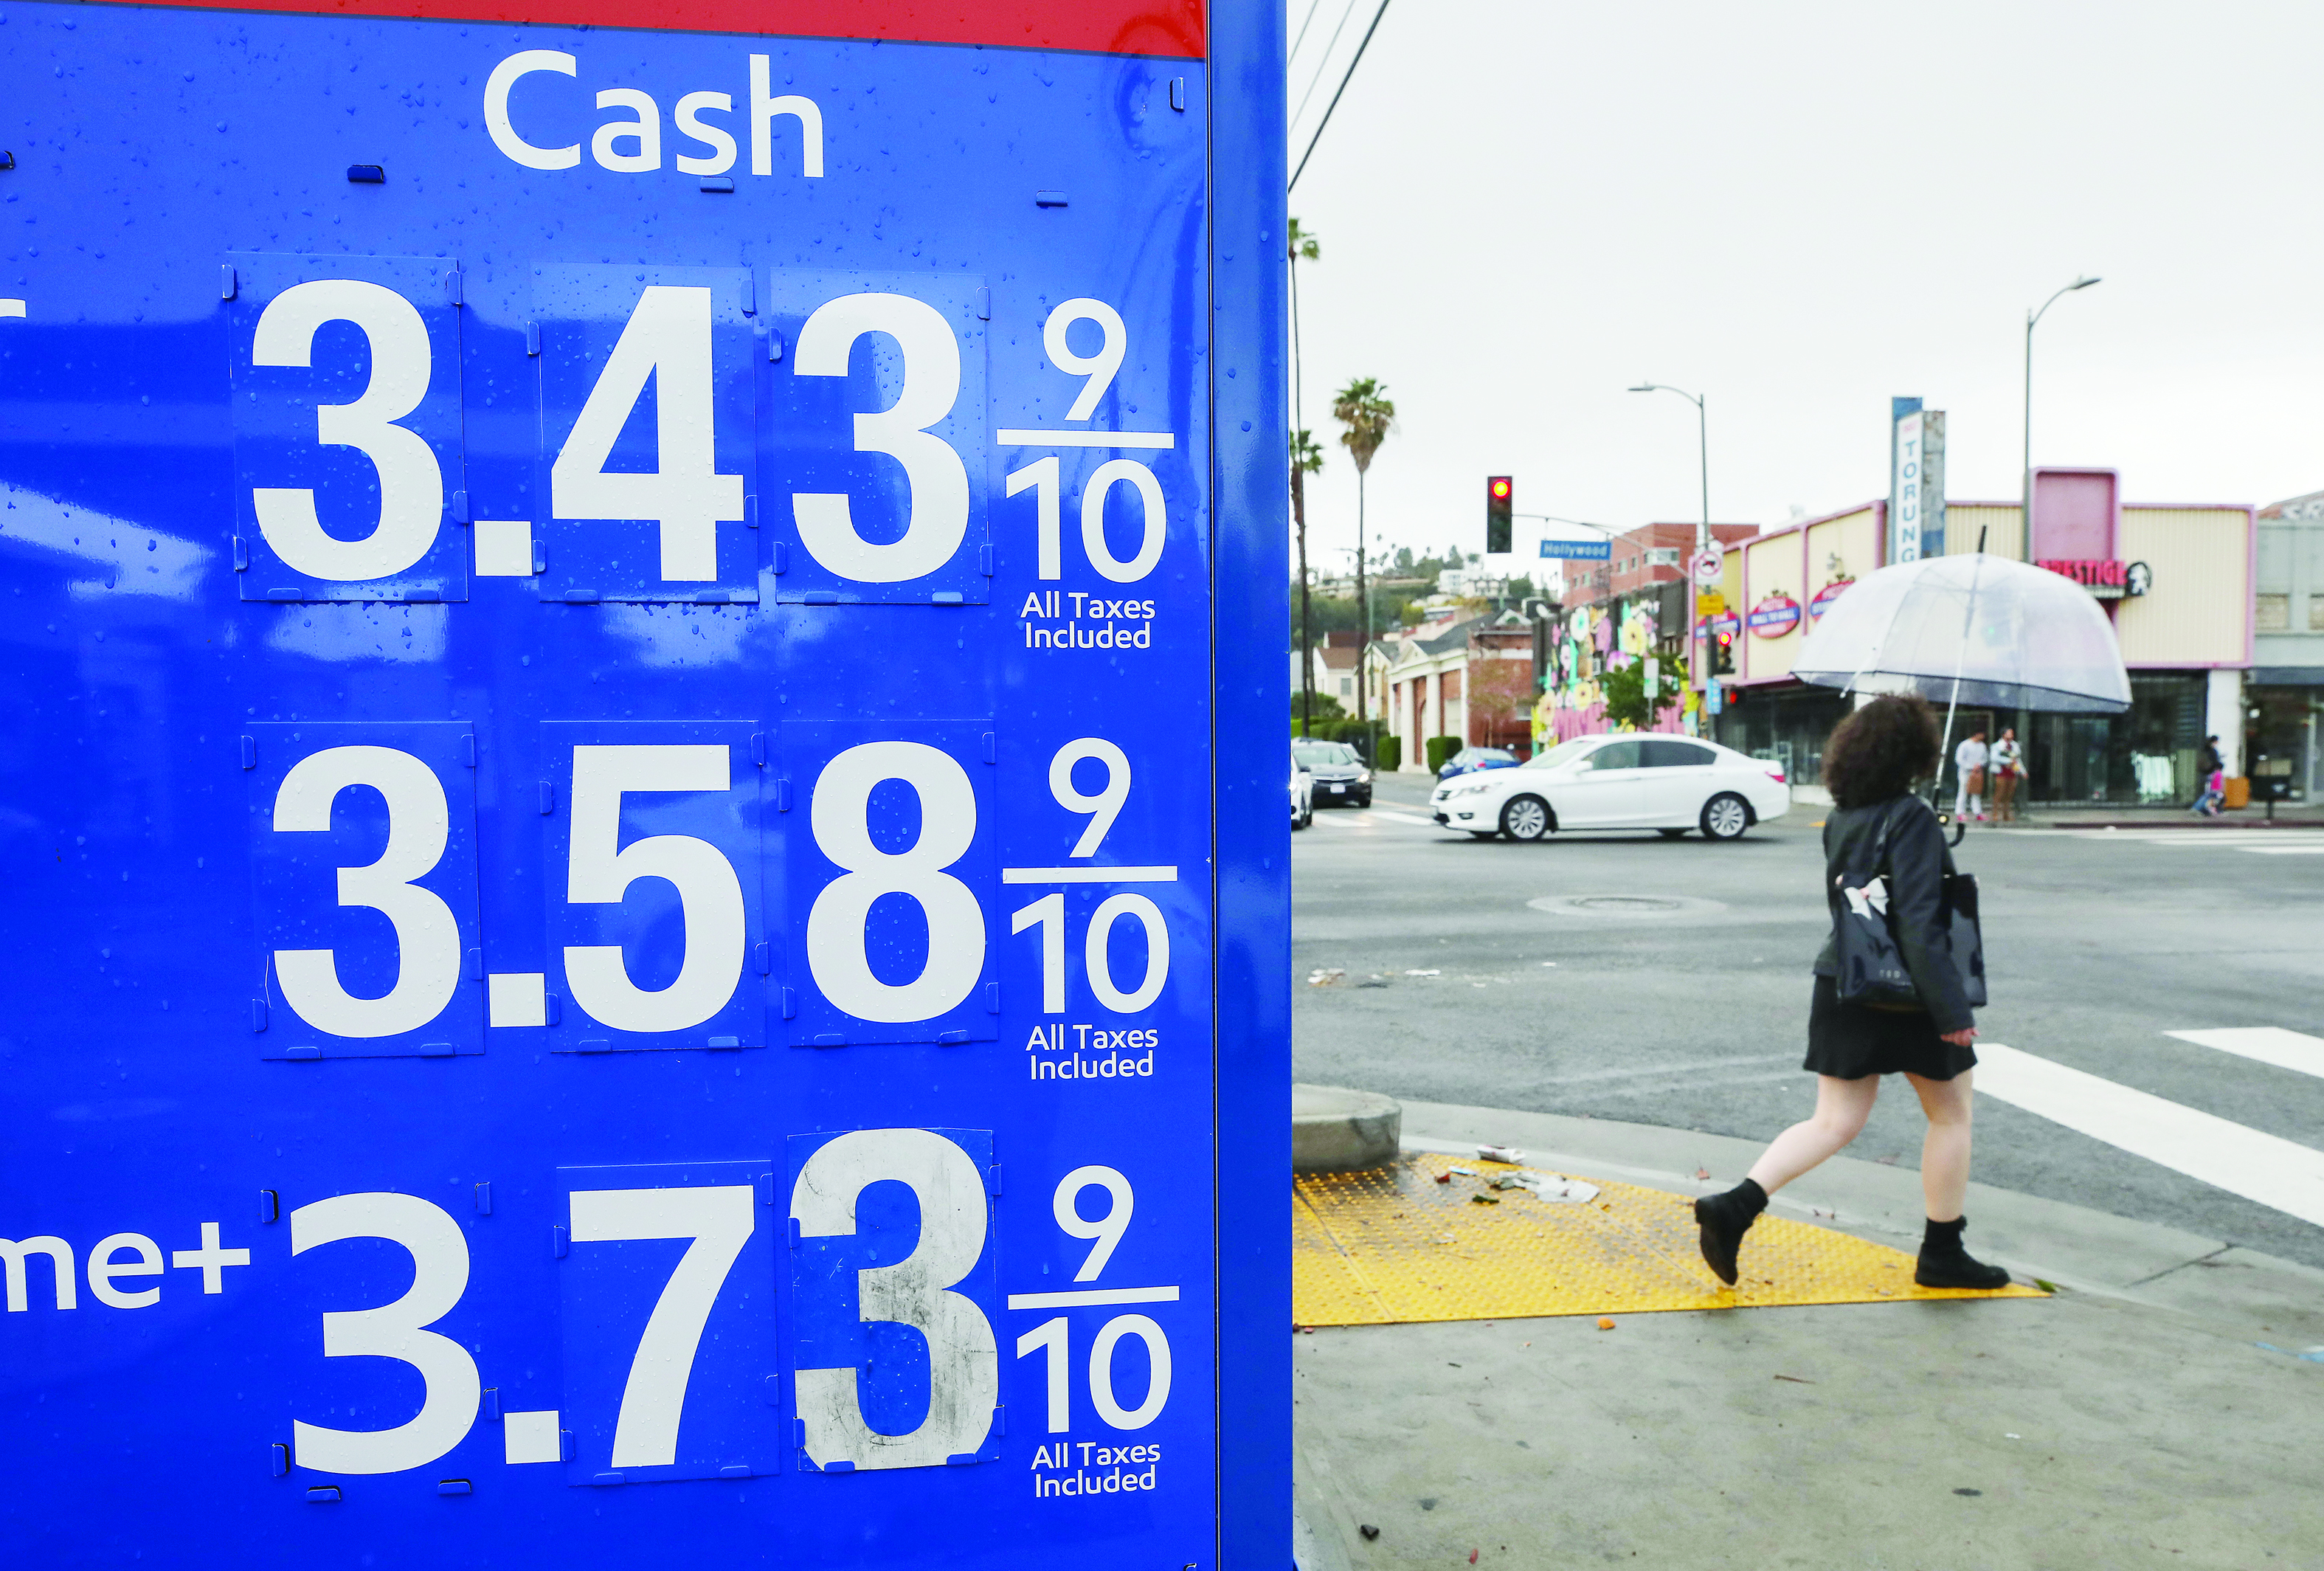 LOS ANGELES, CALIFORNIA - MARCH 10: Gas prices are displayed at a Mobil gas station on March 10, 2020 in Los Angeles, California. The average price of one gallon of regular self-service gasoline in L.A. County dropped to $3.494, the lowest price since March of last year. Demand for gas and oil is declining in the wake of the coronavirus outbreak.   Mario Tama/Getty Images/AFP